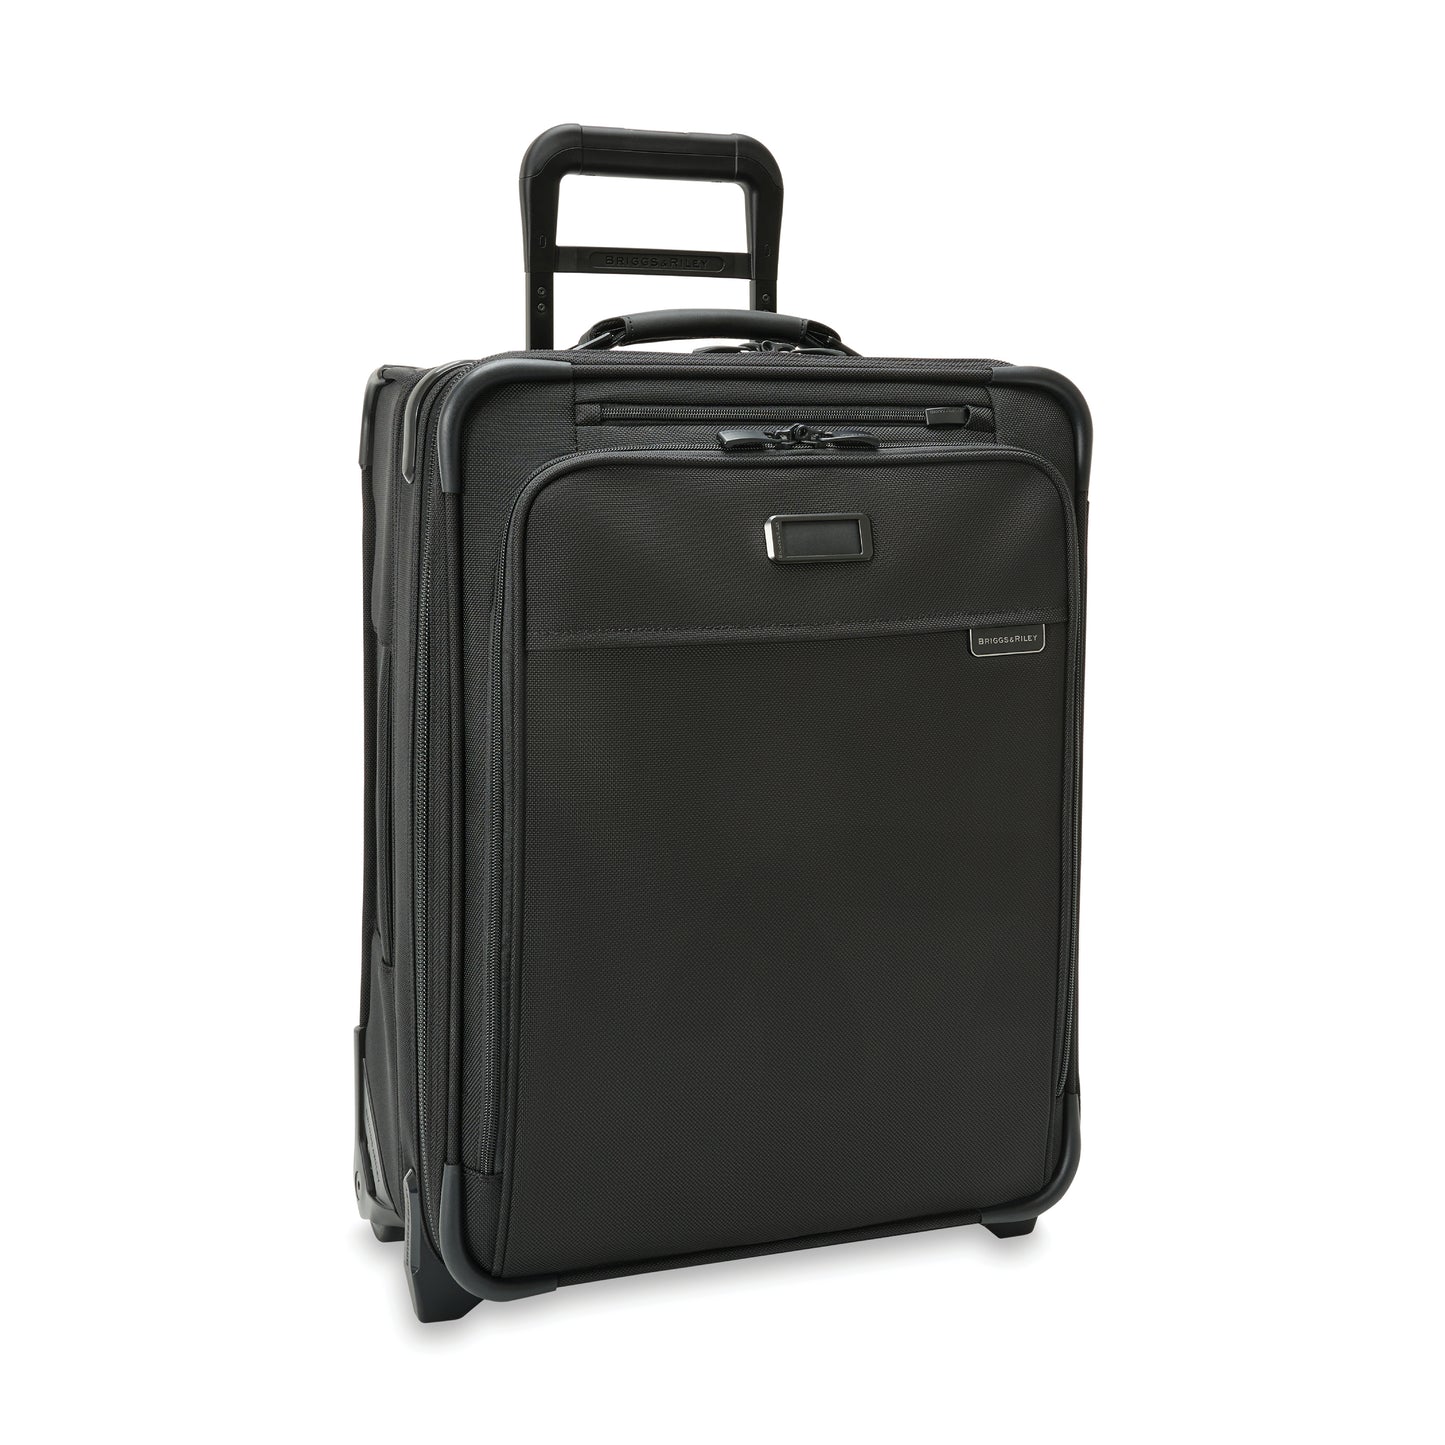 Briggs & Riley Baseline Global Carry-On 2 Wheel Upright